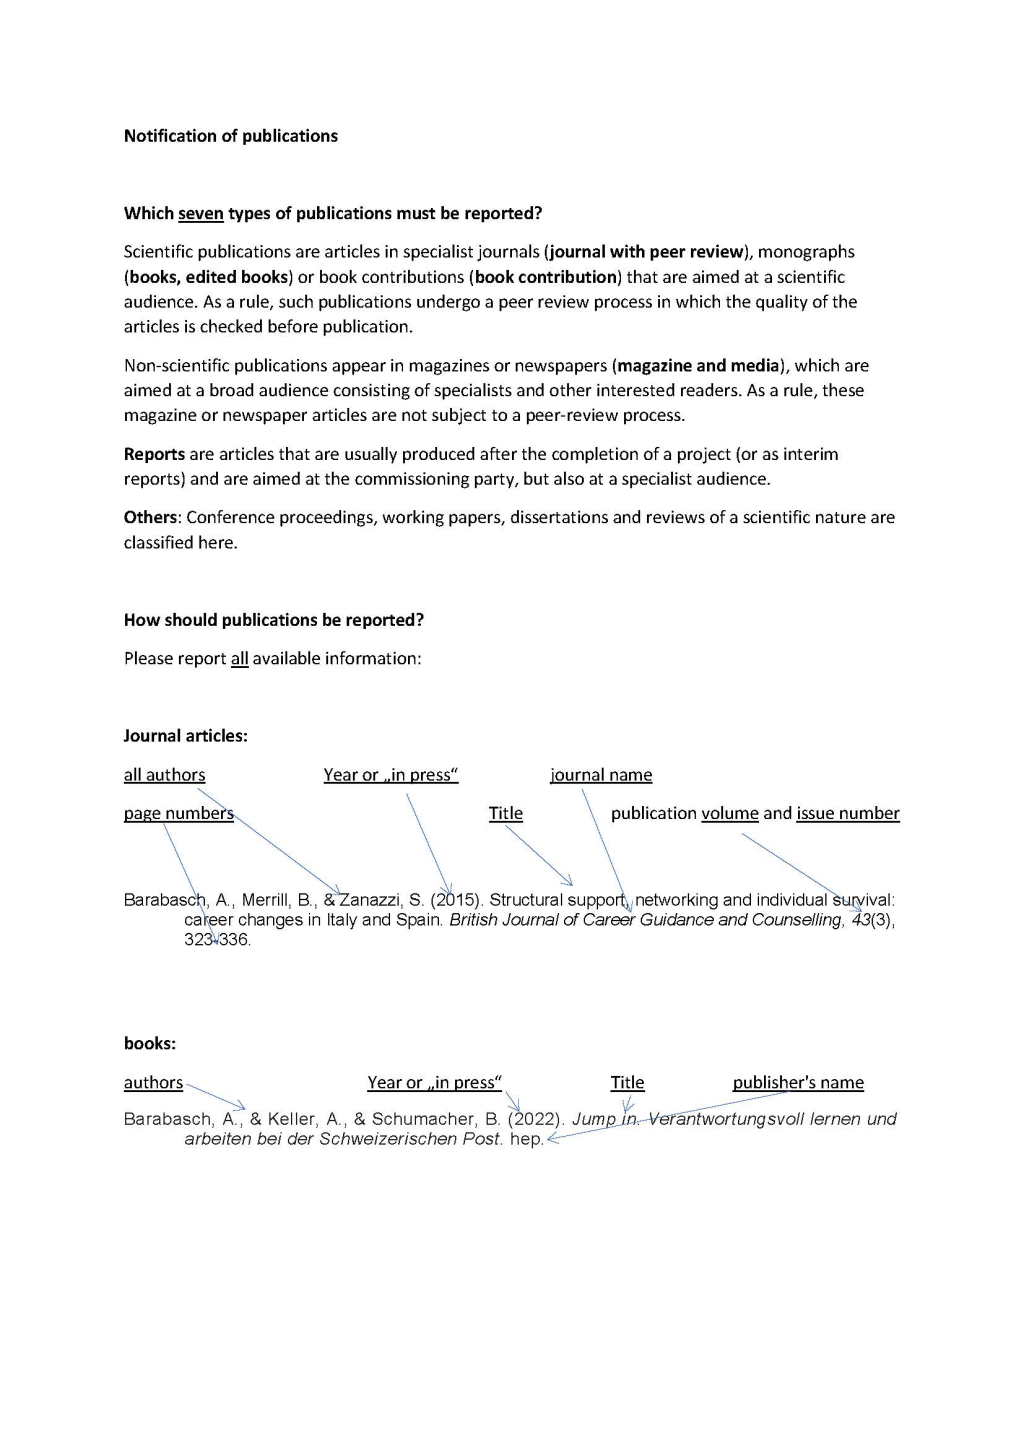 OA_Notification of publications and congresses (page 1)